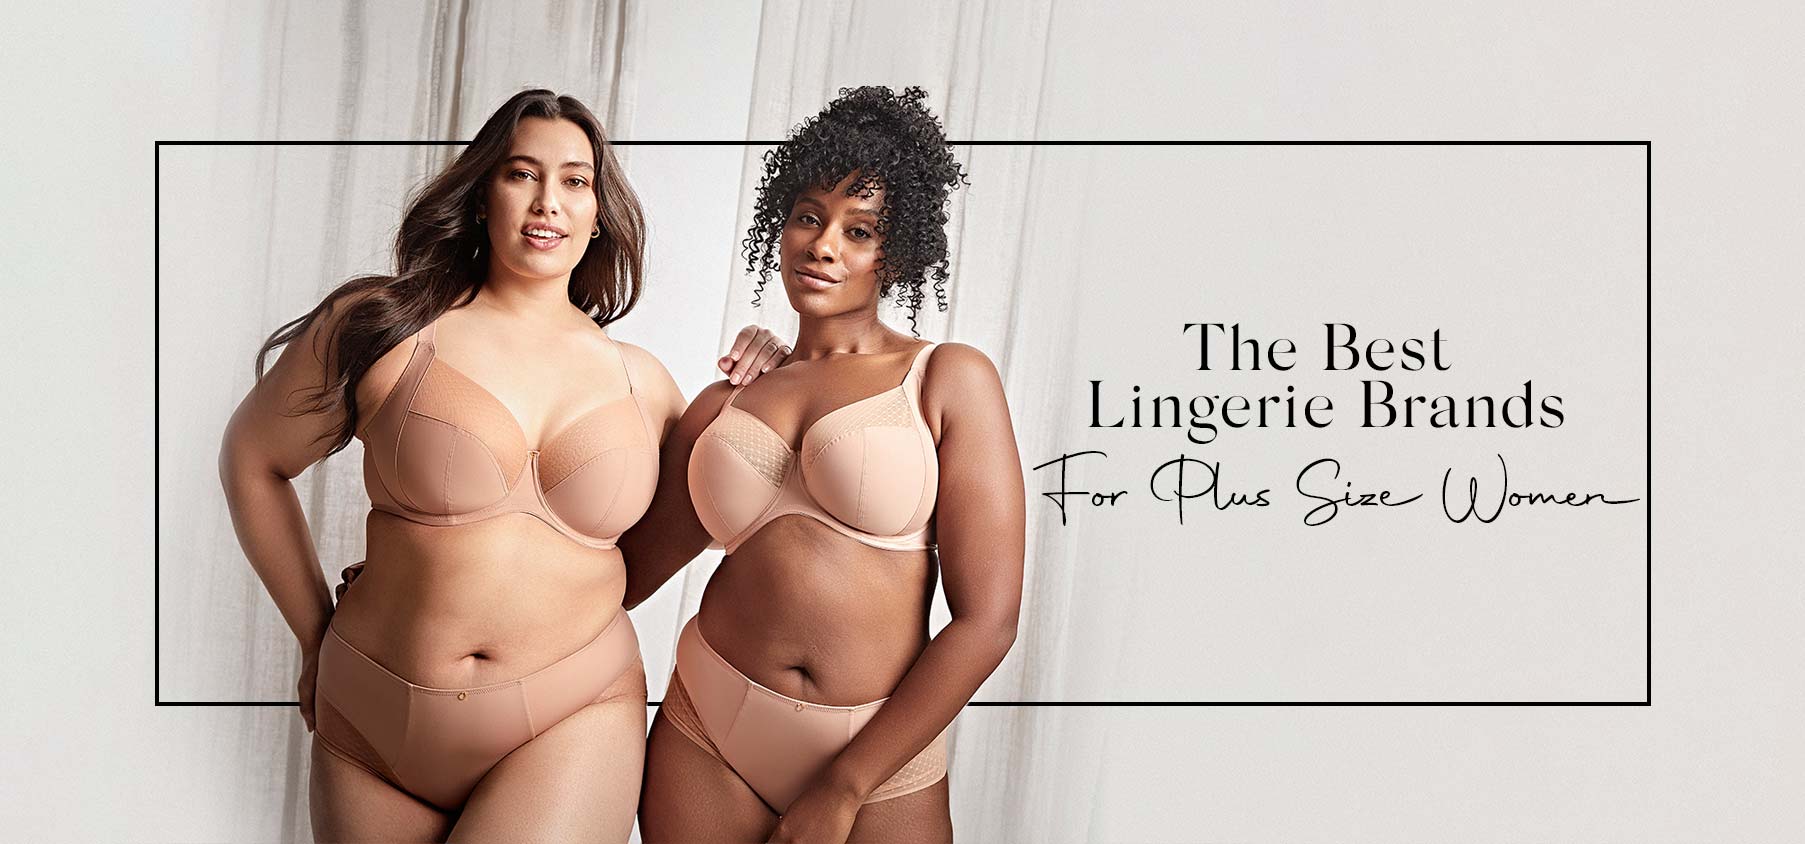 Intimo Lingerie - Smooth silhouettes and simple styling in